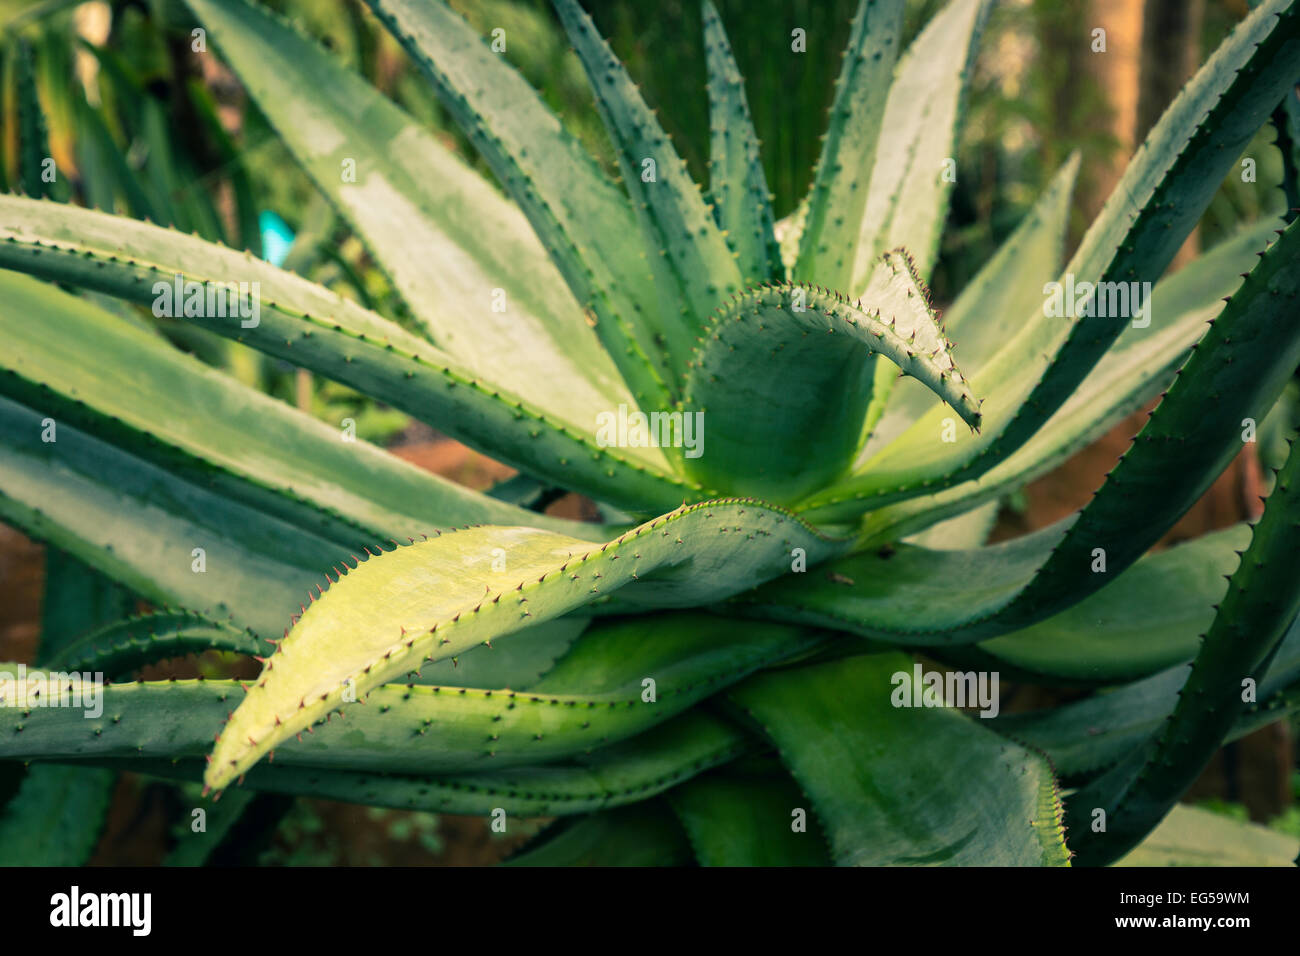 Naturally grown Aloe Vera plant with thorn spiked leaves. Stock Photo